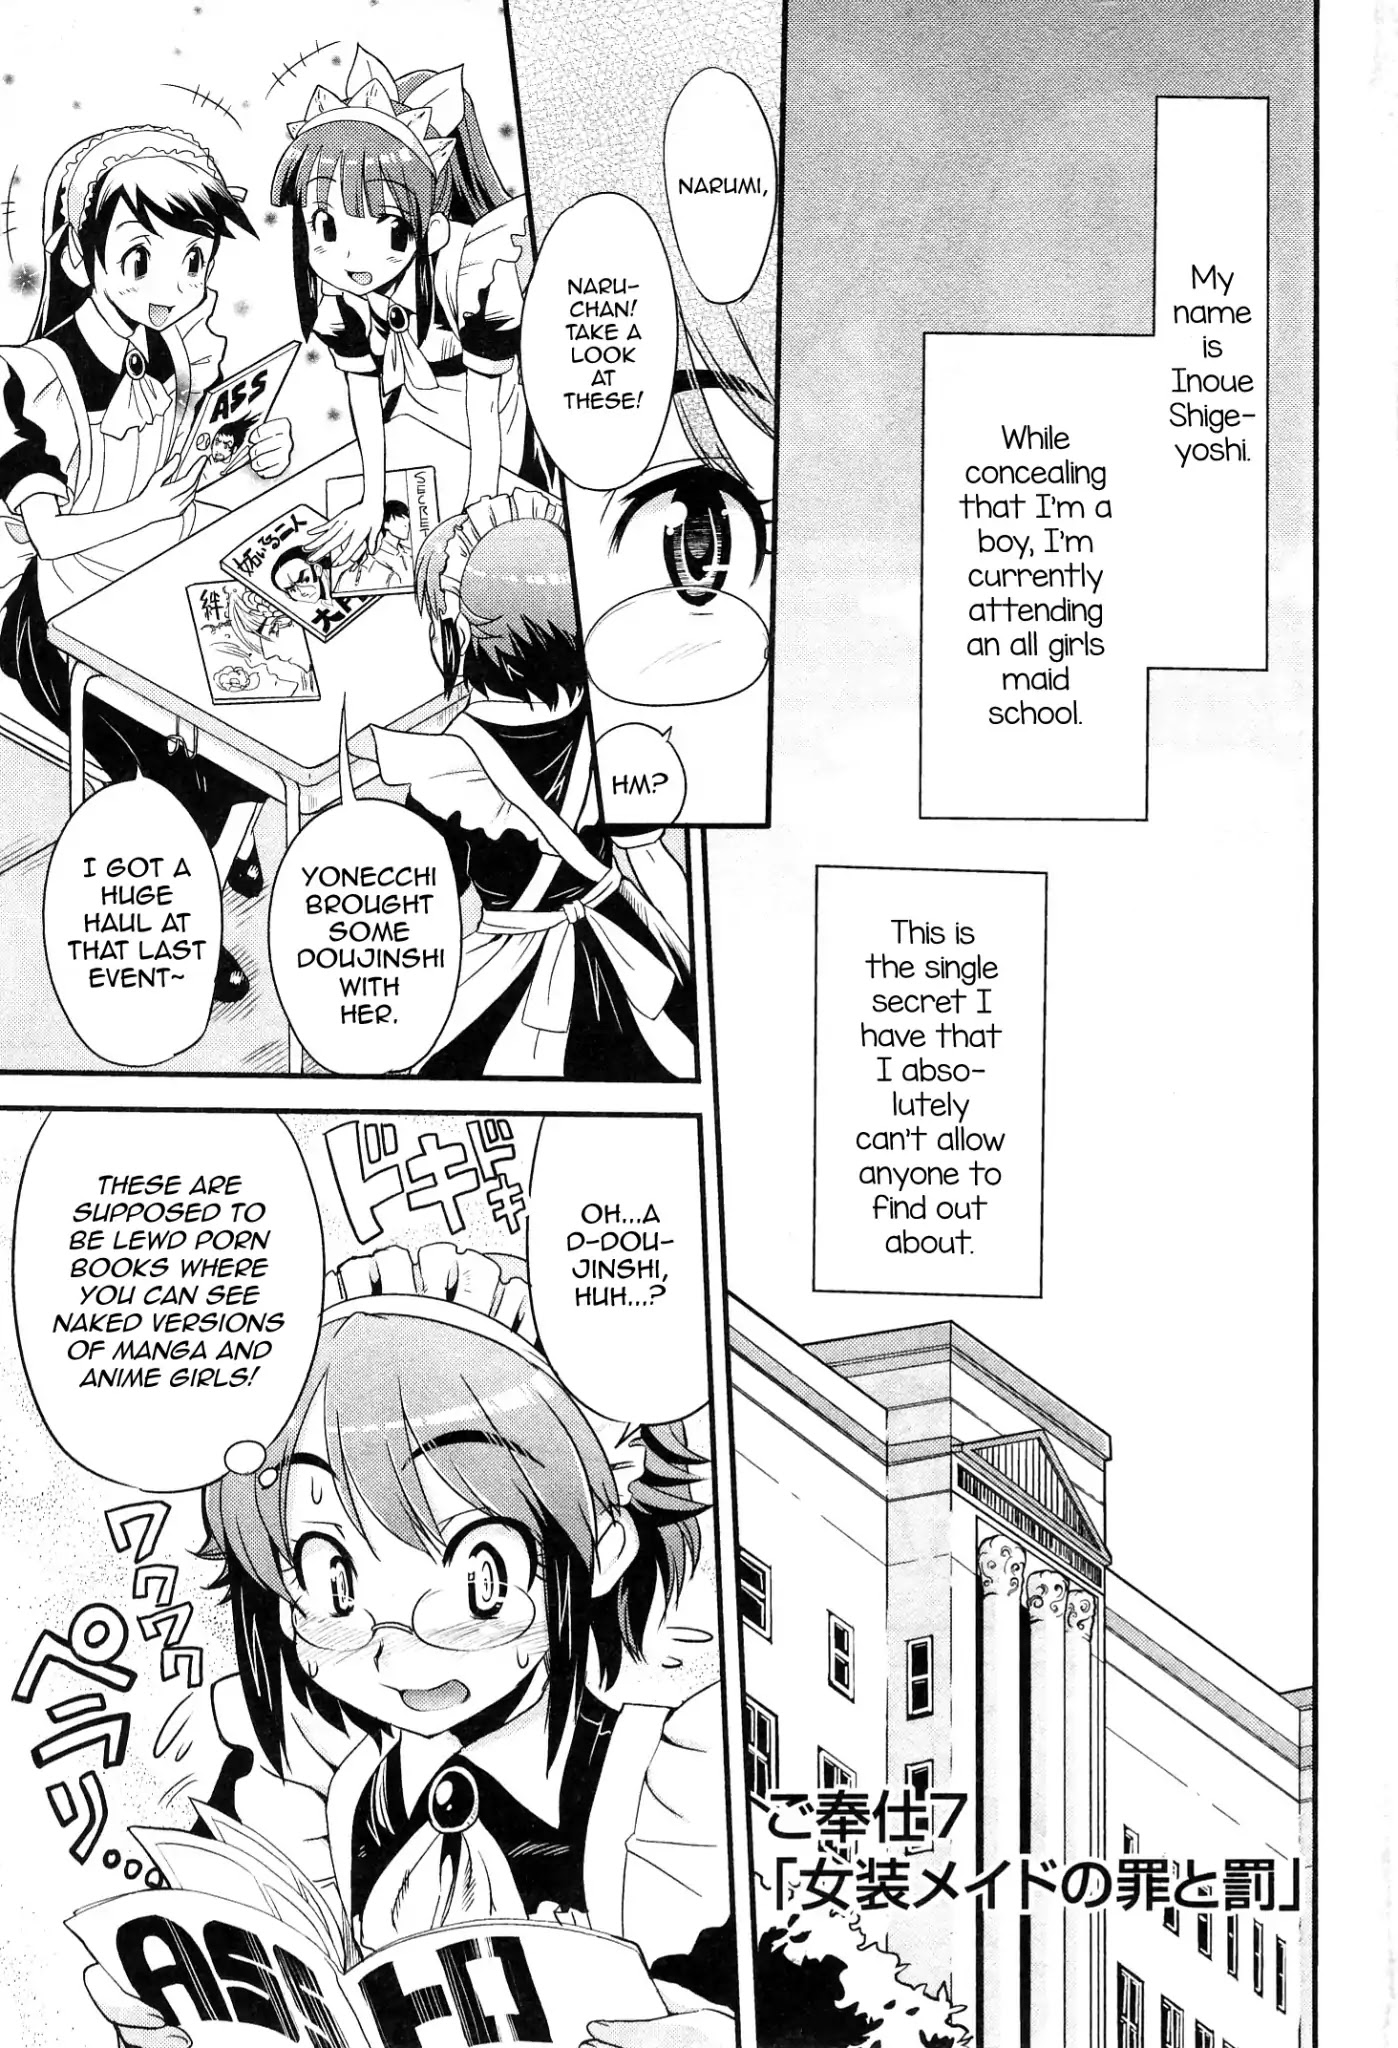 Maid In Japan - Page 1